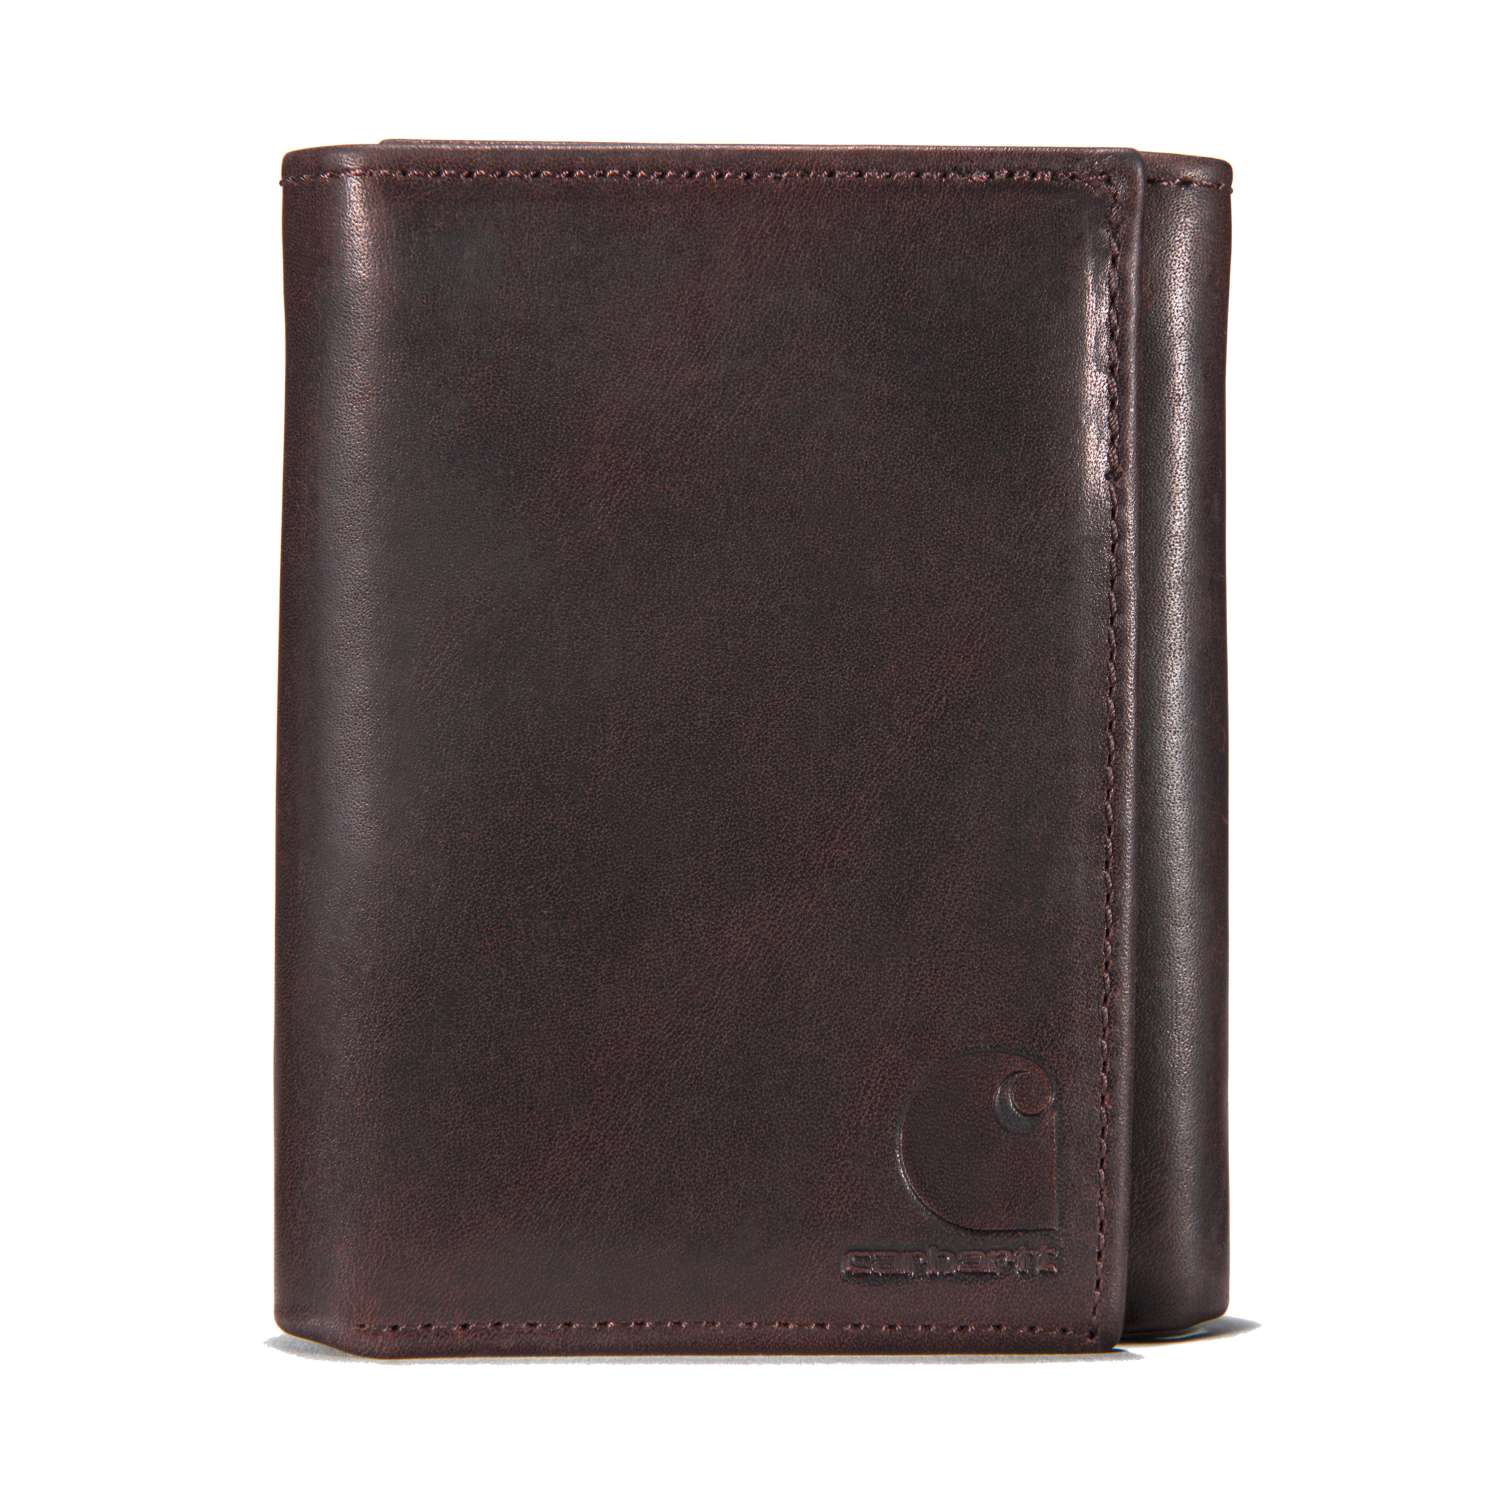 OIL_TAN_LEATHER_TRIFOLD_WALLET_cWP6hCNXqY